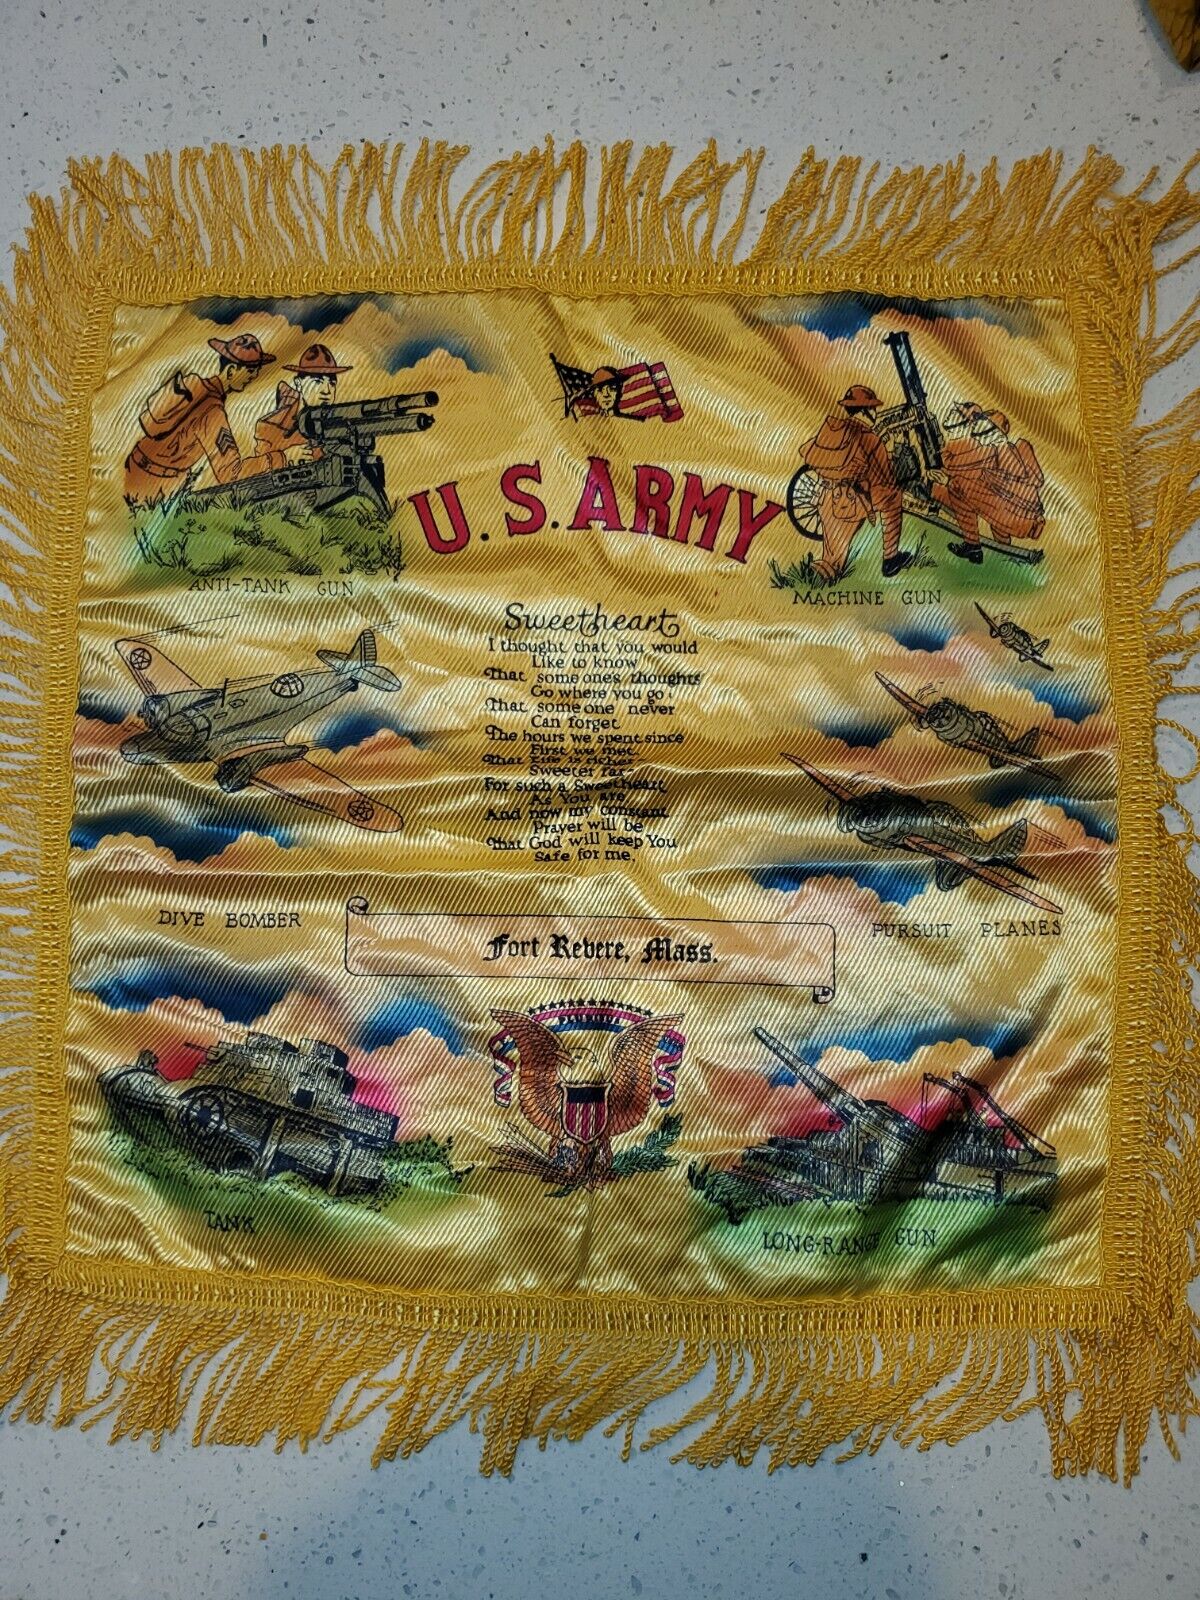 WWII Army pillow cover for service in World War 2 Great Images Tanks Planes Etc